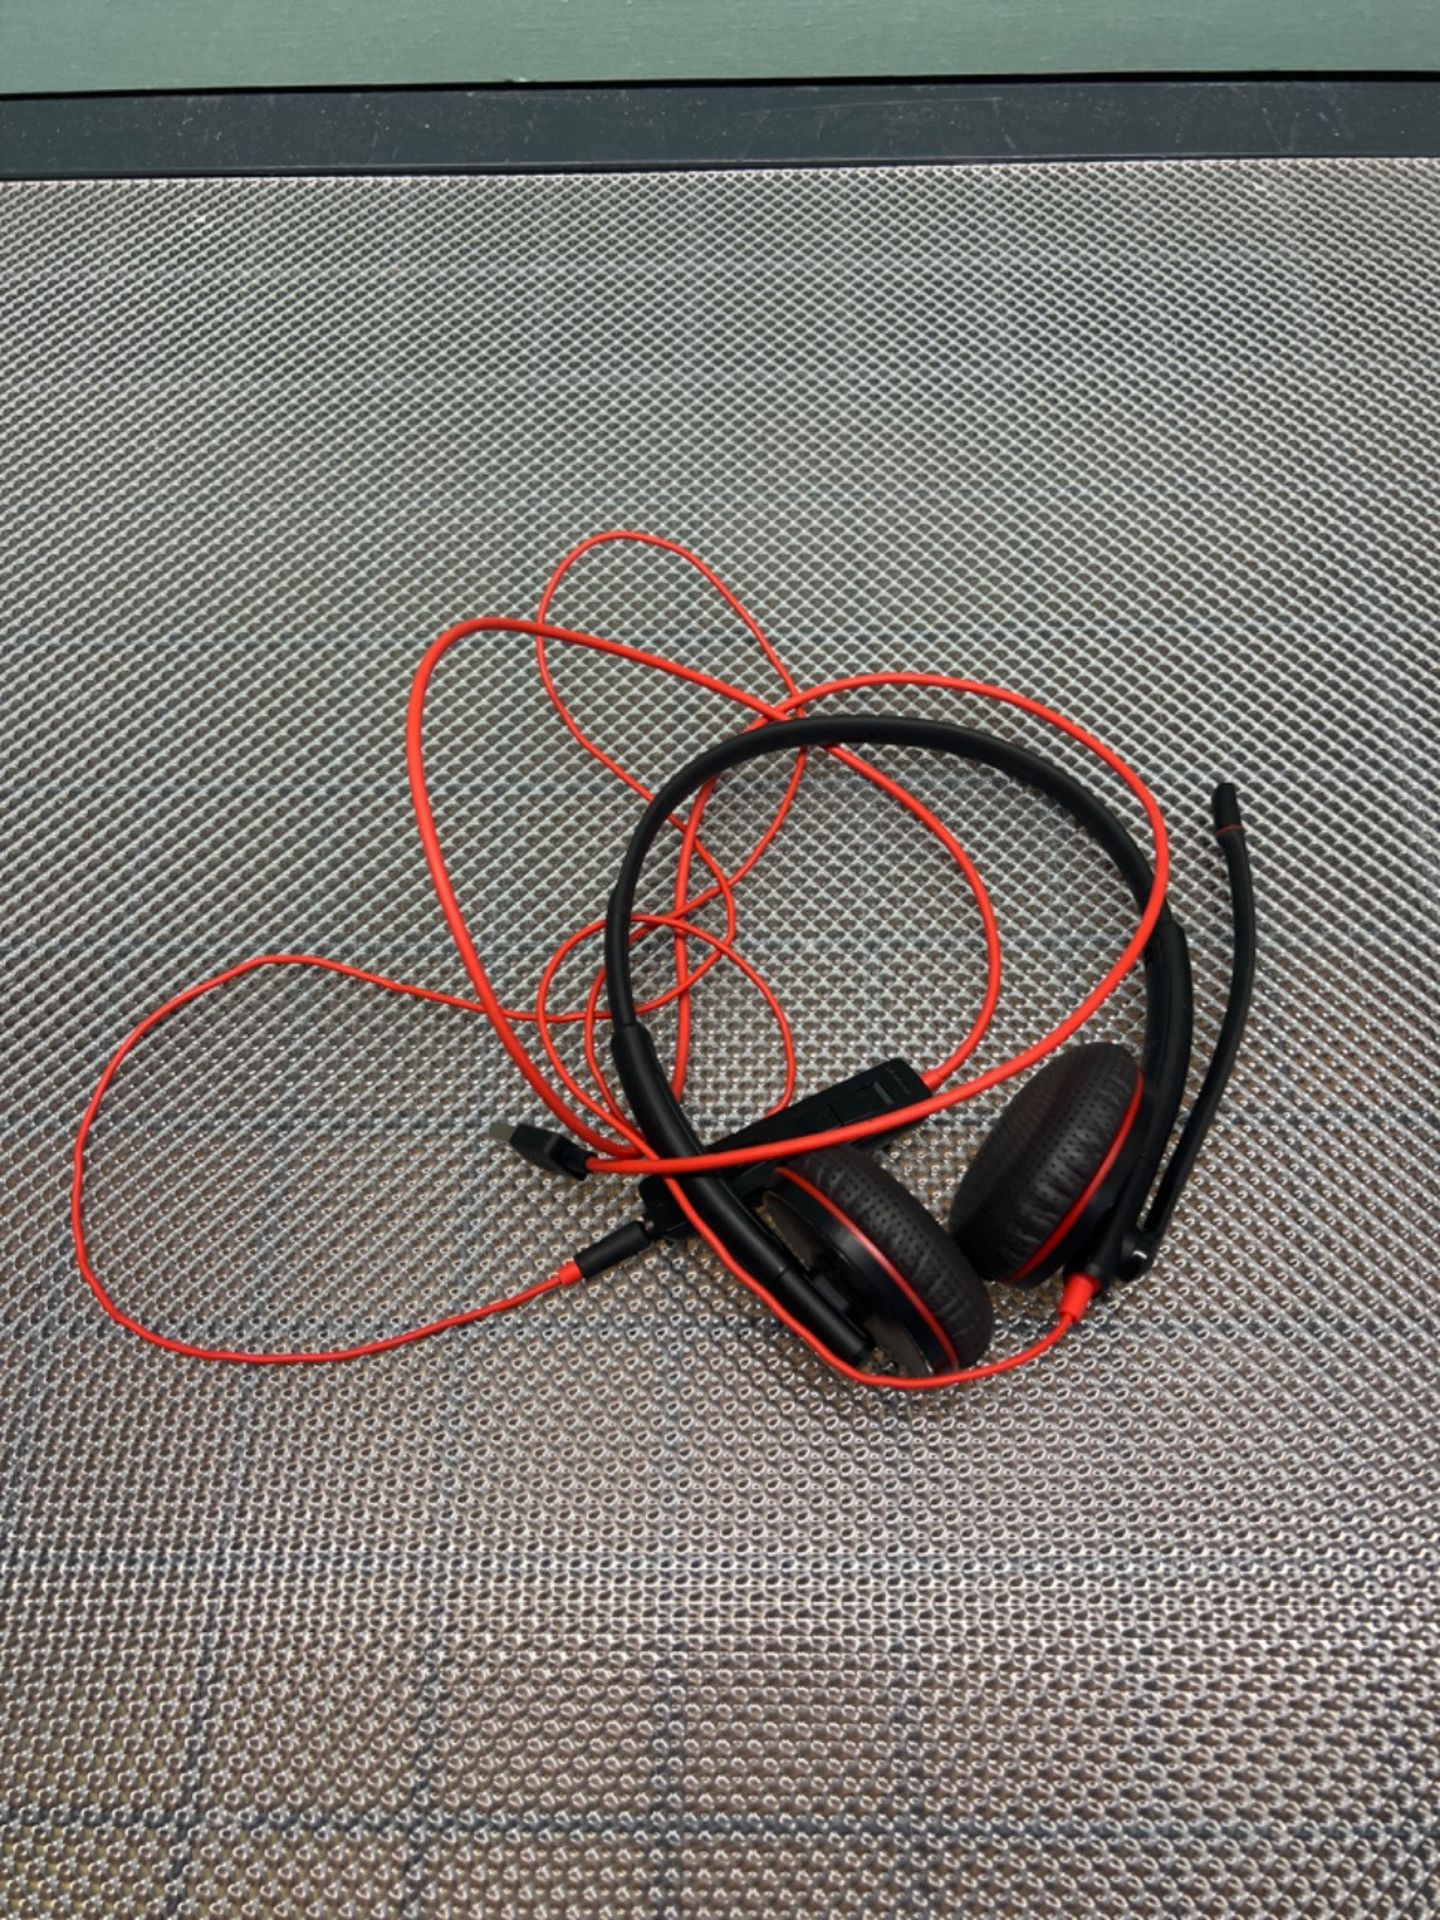 Plantronics - Blackwire 3220 USB-A Wired Headset - Dual Ear (Stereo) with Boom Mic - Connect to PC/ - Image 3 of 3